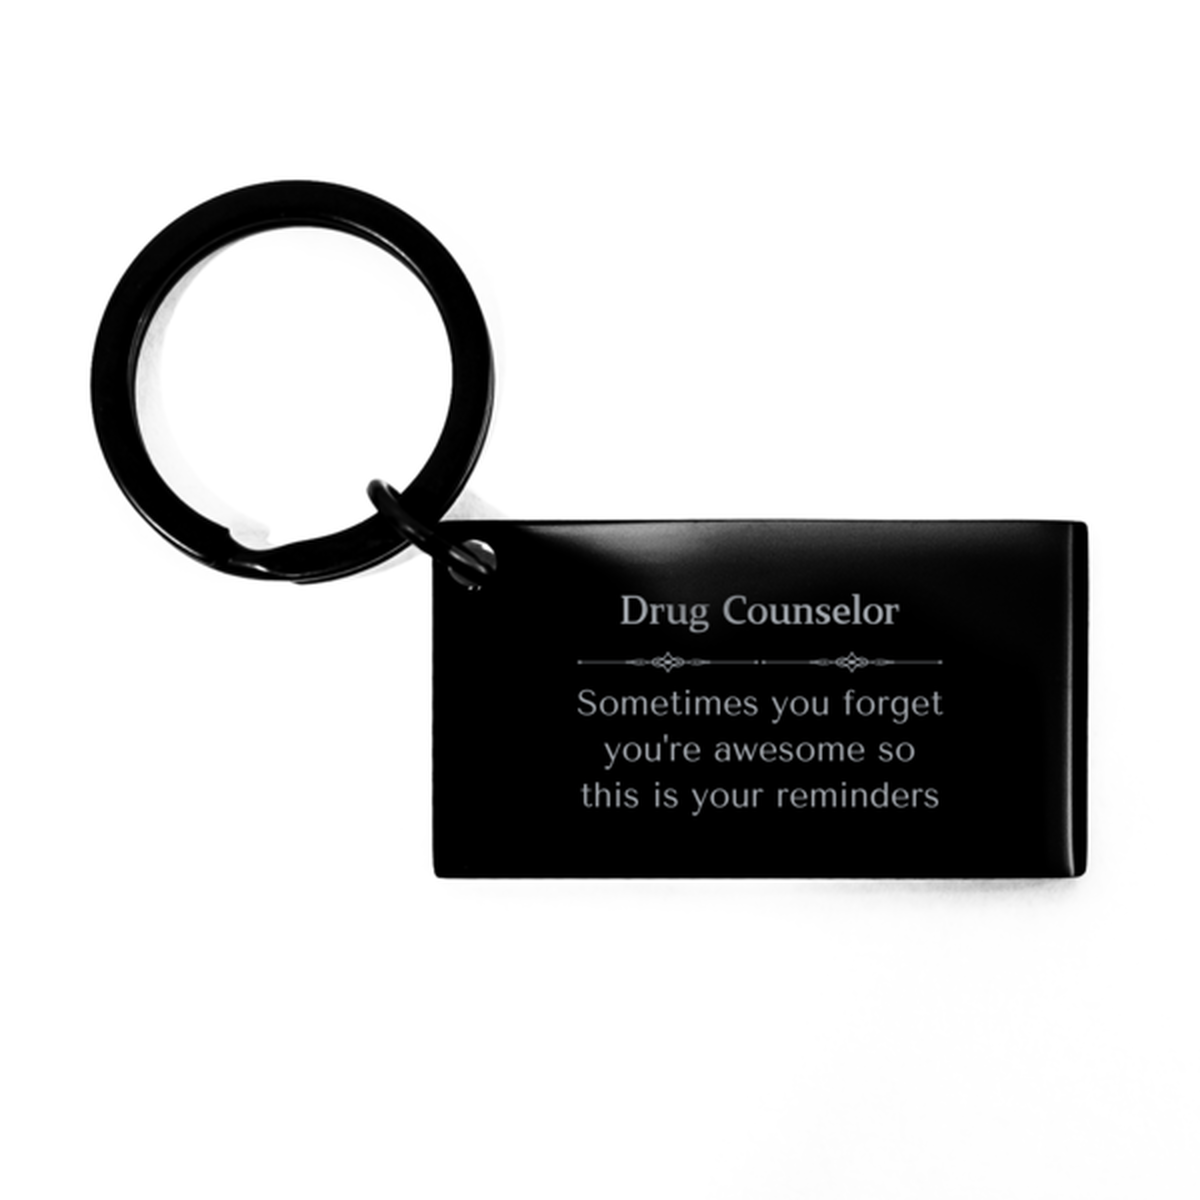 Sentimental Drug Counselor Keychain, Inspector Sometimes you forget you're awesome so this is your reminders, Graduation Christmas Birthday Gifts for Drug Counselor, Men, Women, Coworkers